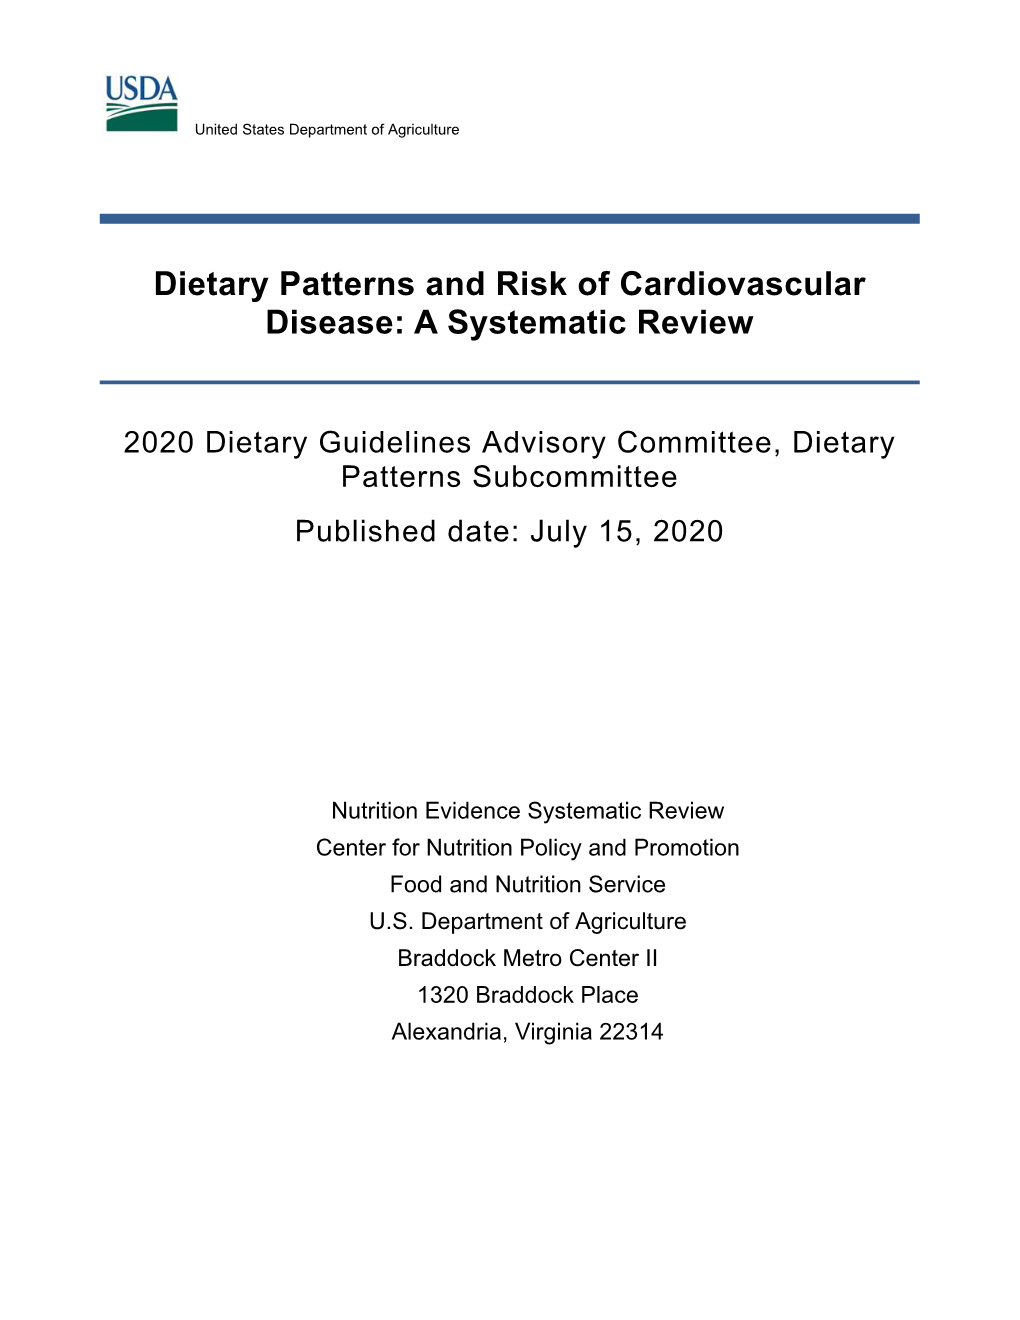 Dietary Patterns and Risk of Cardiovascular Disease: a Systematic Review